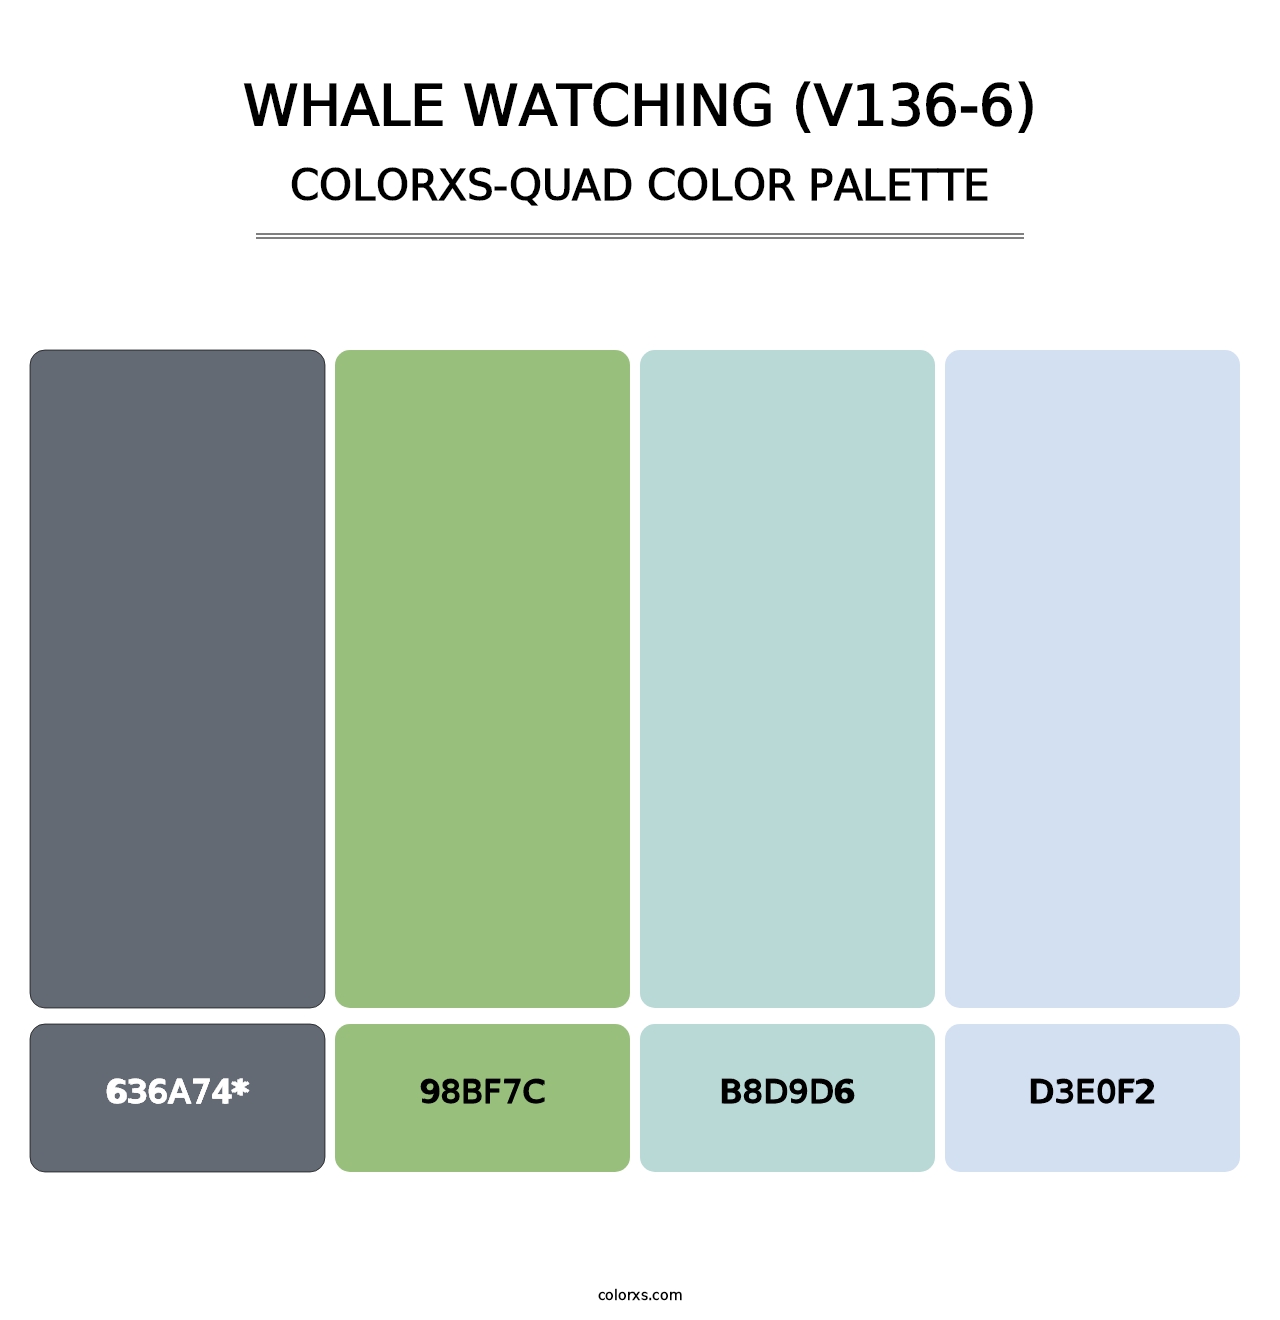 Whale Watching (V136-6) - Colorxs Quad Palette